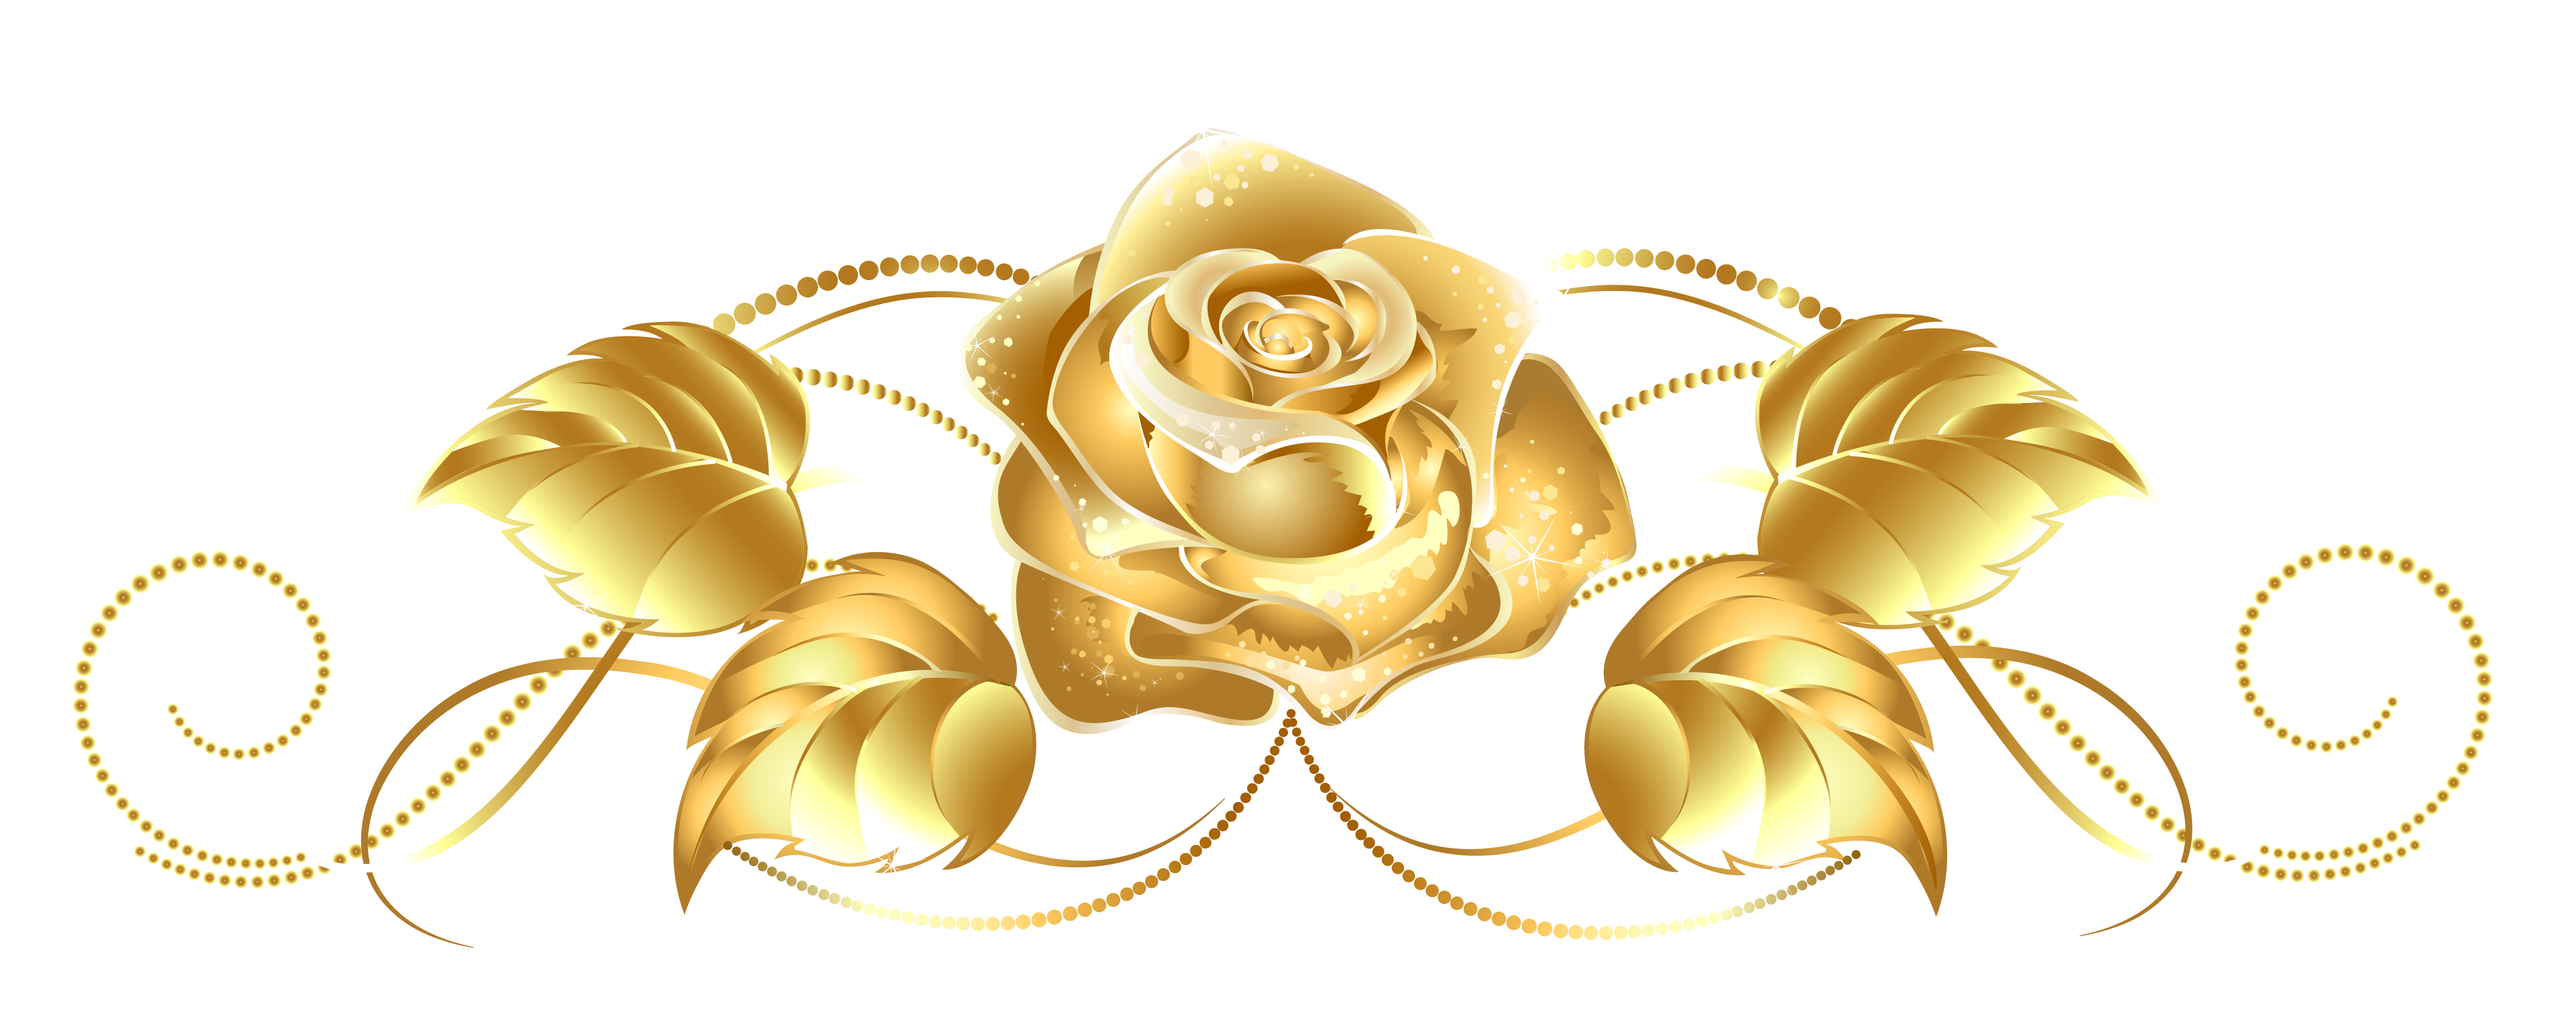 Free Gold Flowers Png, Download Free Gold Flowers Png png images, Free